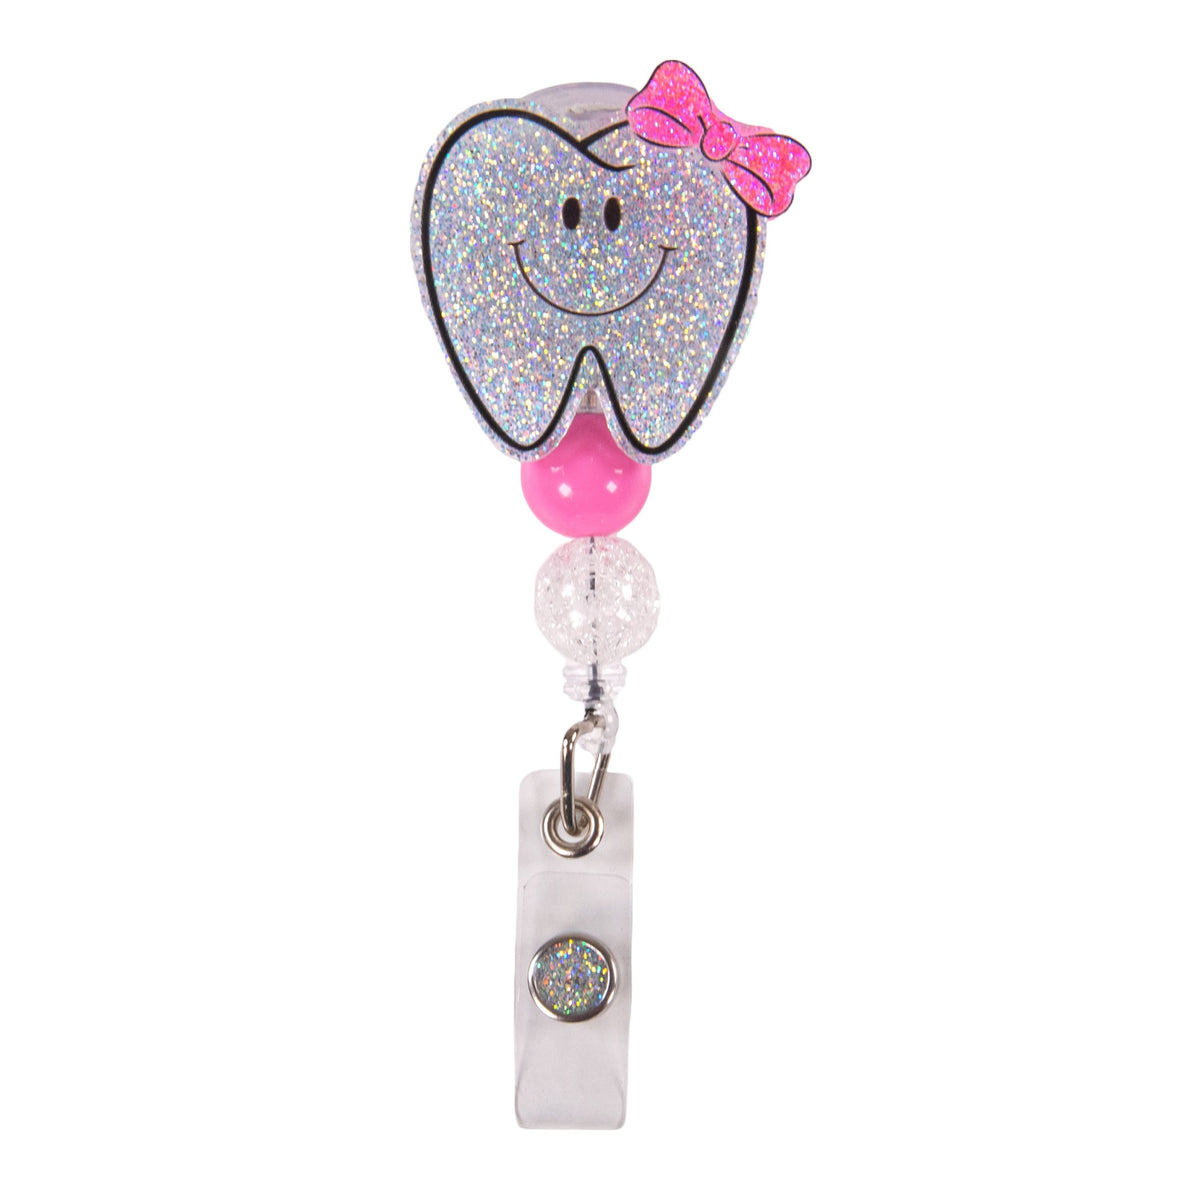 Buy Retractable Badge Reel - Floral Tooth - Personalized Name